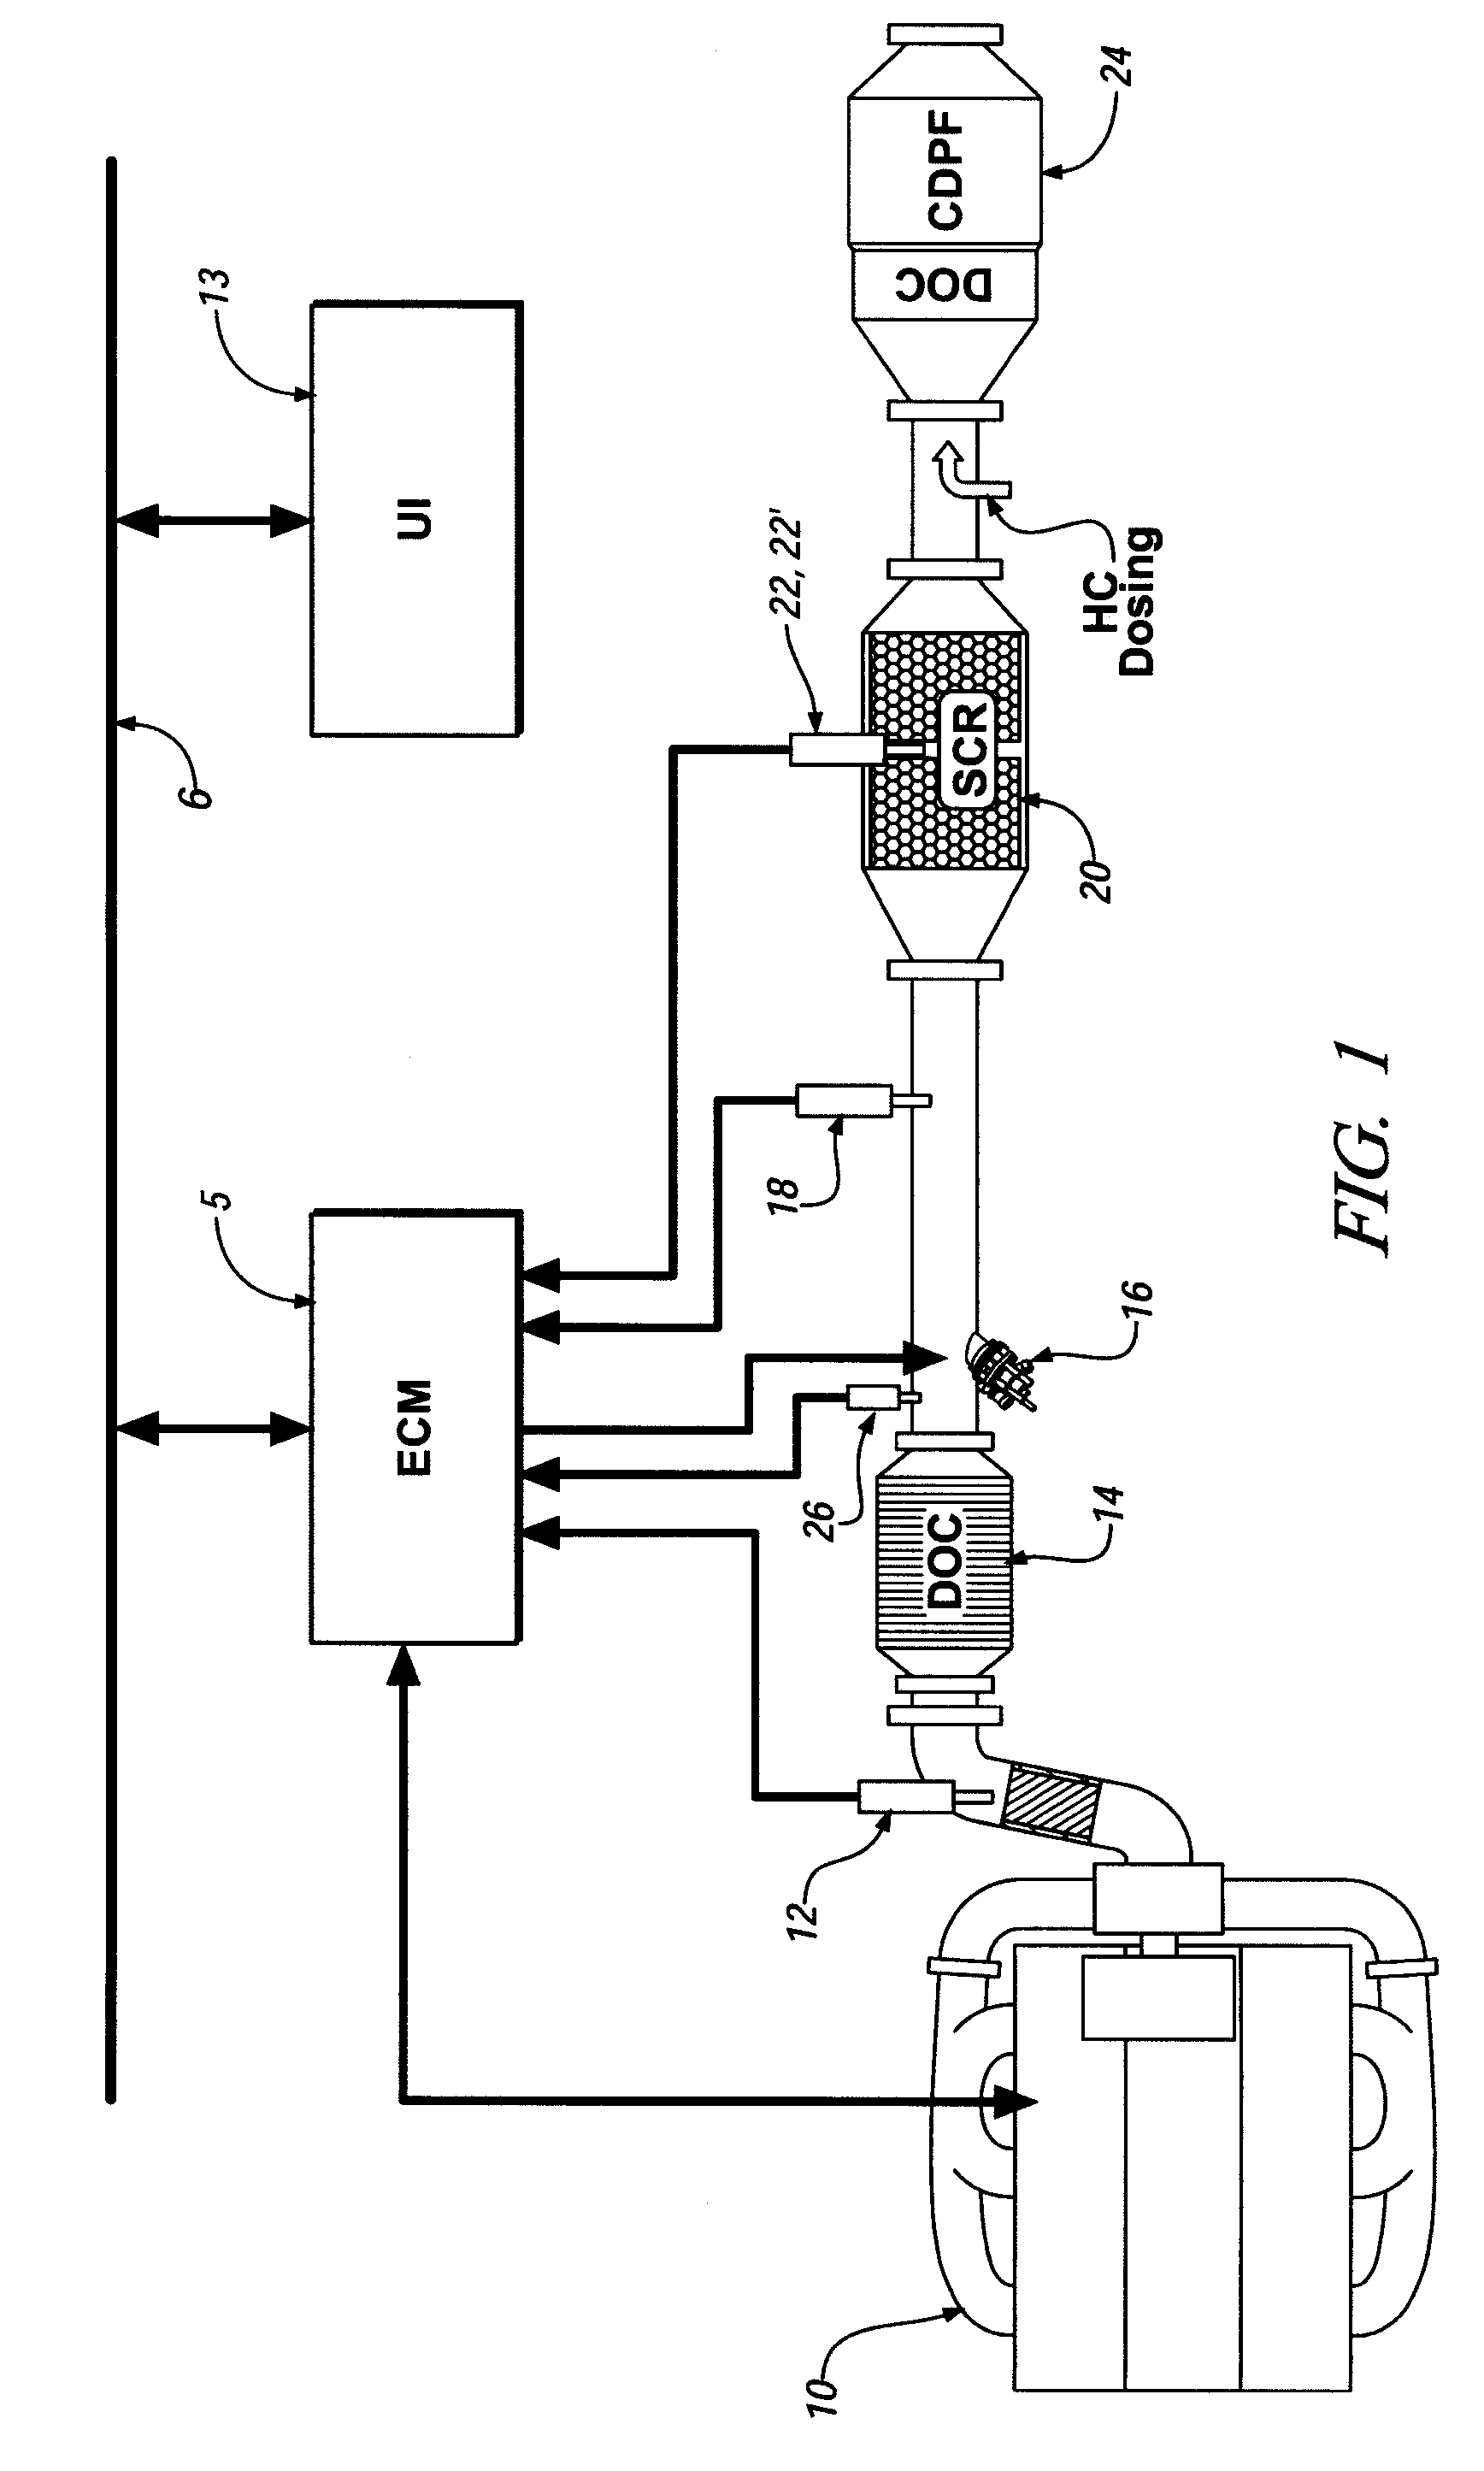 Method and Apparatus for Monitoring a Urea Injection System in an Exhaust Aftertreatment System